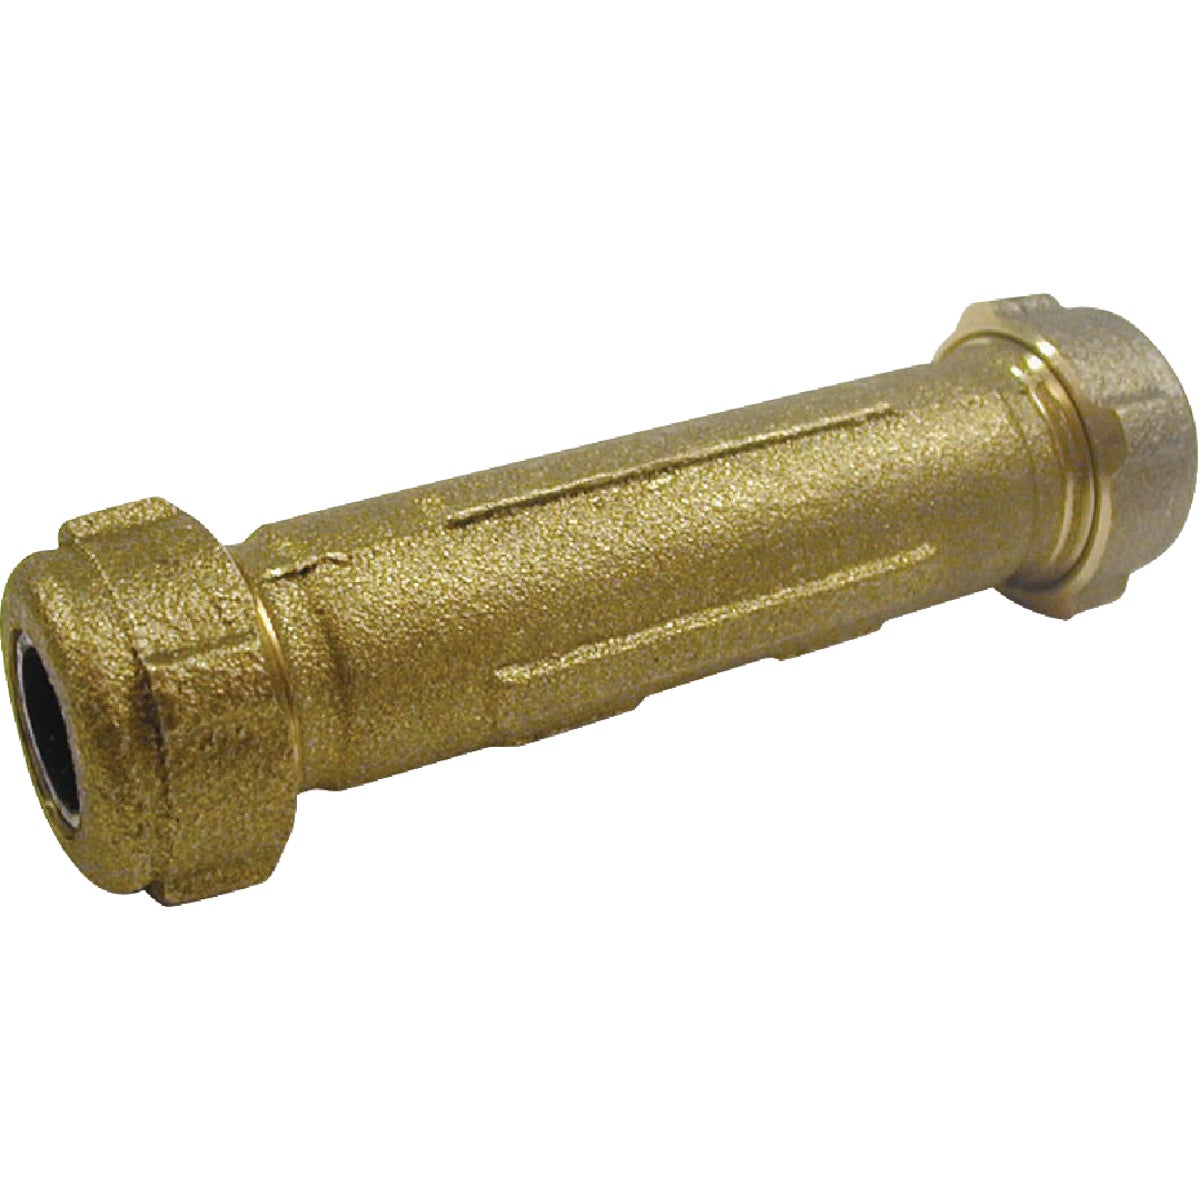 Item 464679, Compression coupling available in 2 different sizes, has a brass body and 